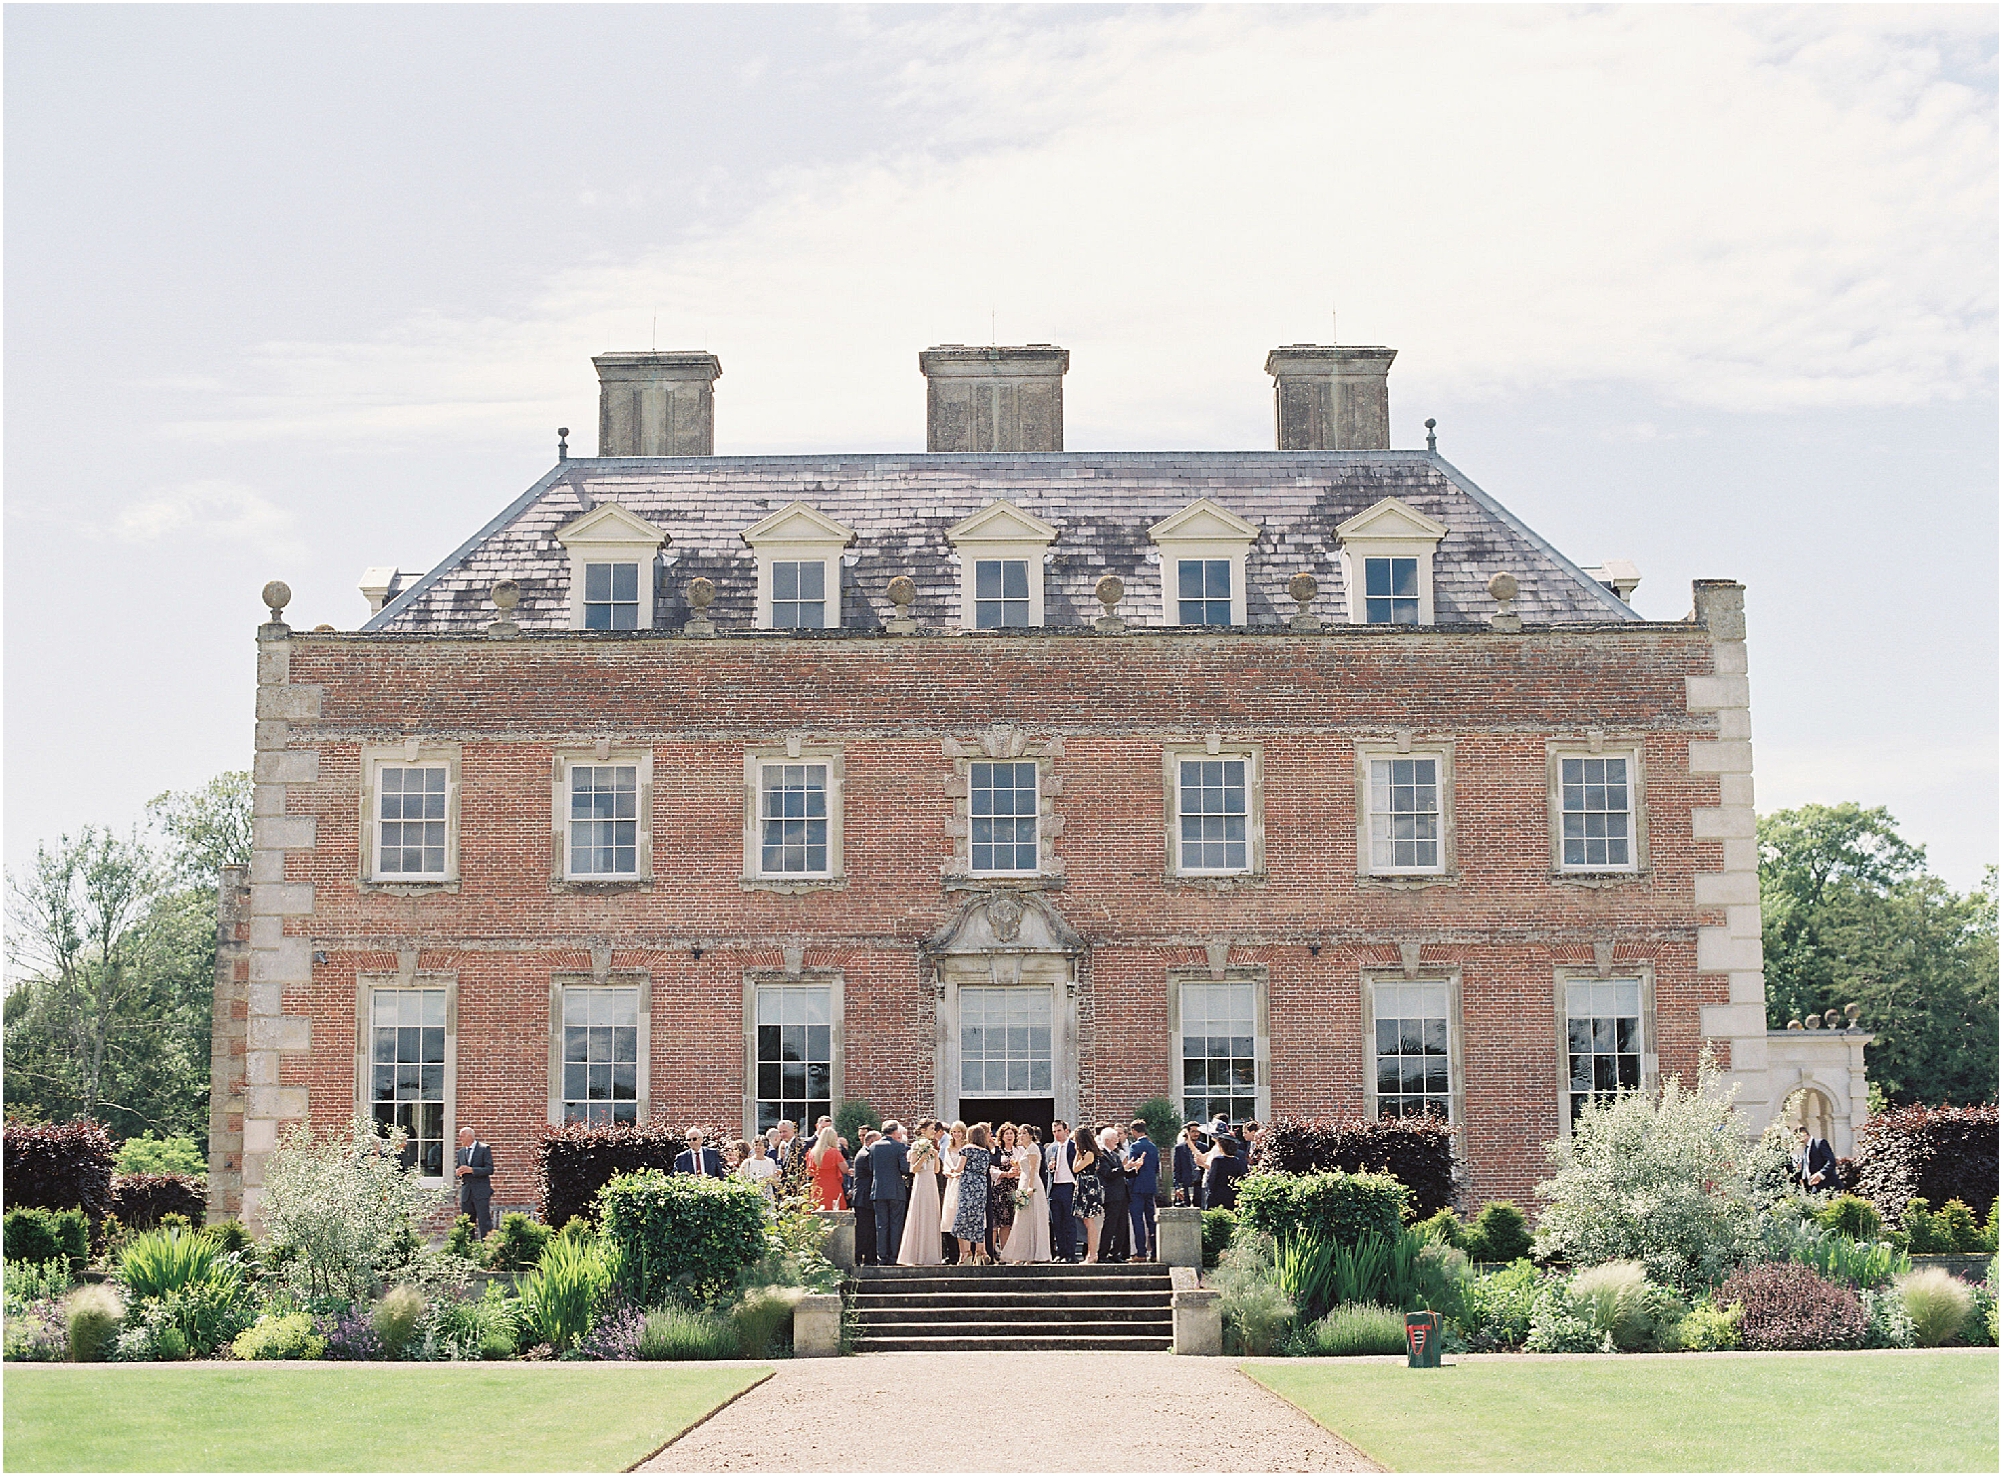 St Giles House photographed during a wedding reception by Camilla Arnhold romantic film wedding photogragraphy